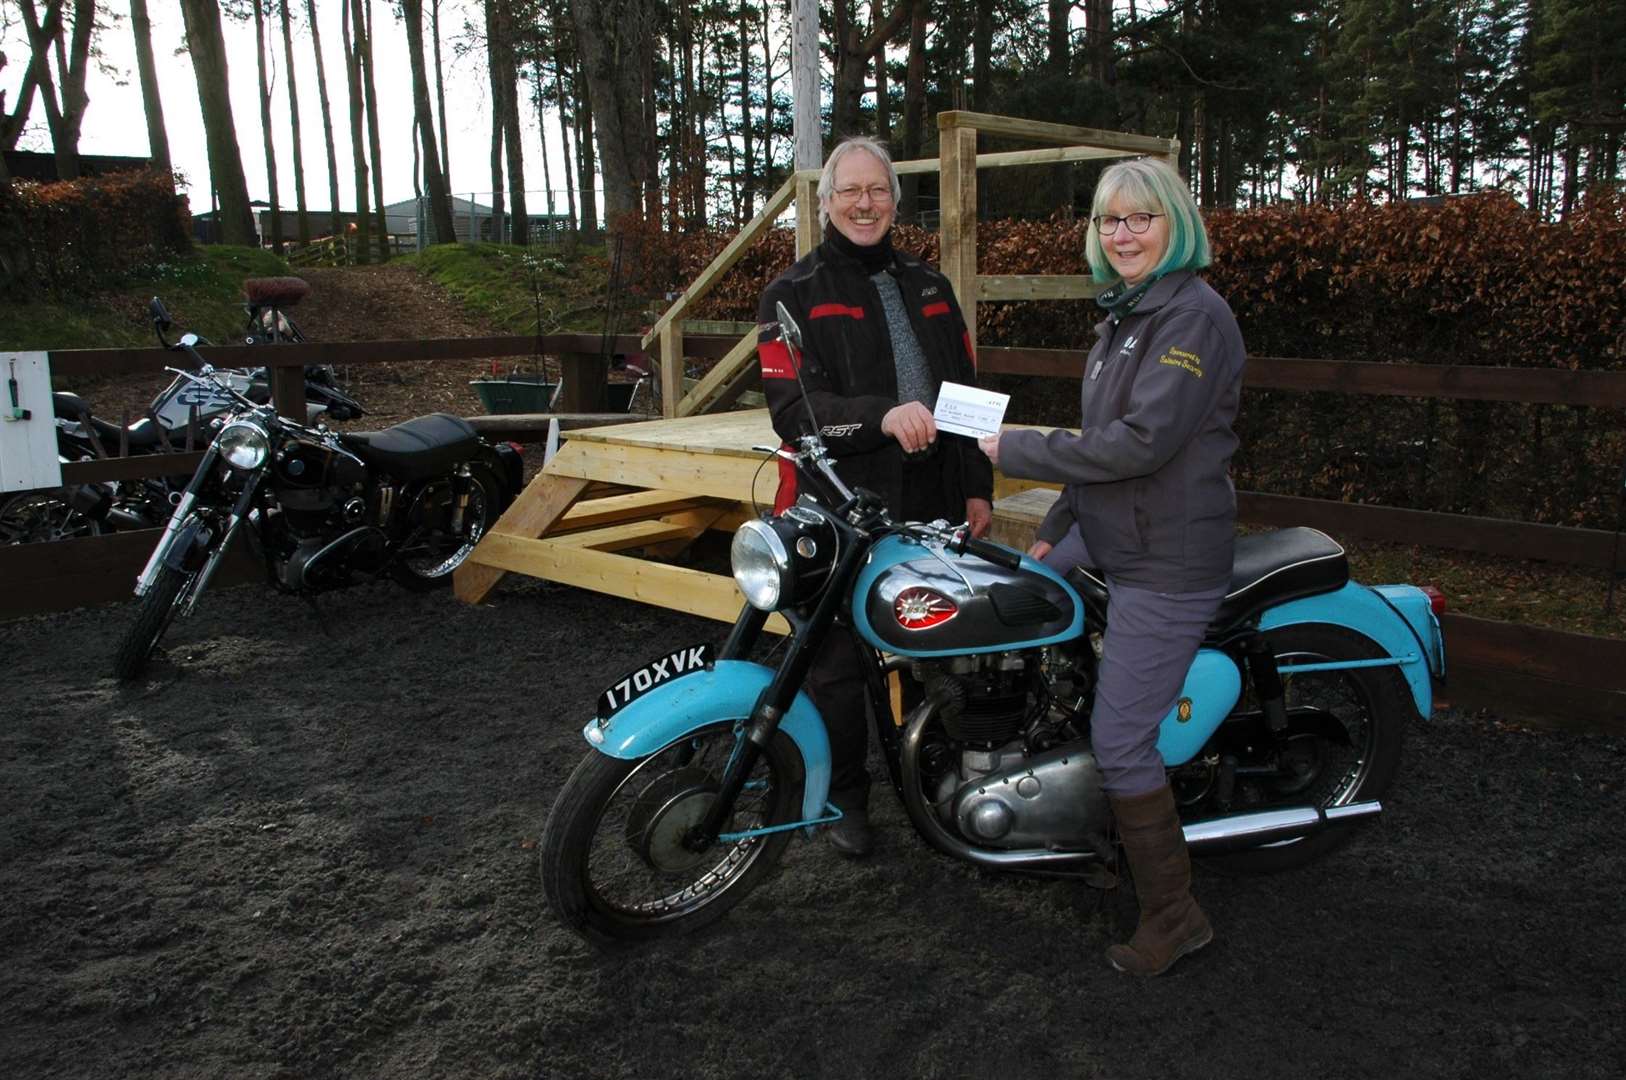 A cheque for £100 presented to Sonia Howell by (either) Highland Classic Motorcycle Club secretary Malcolm Davidson. Picture by Neil Ellison.